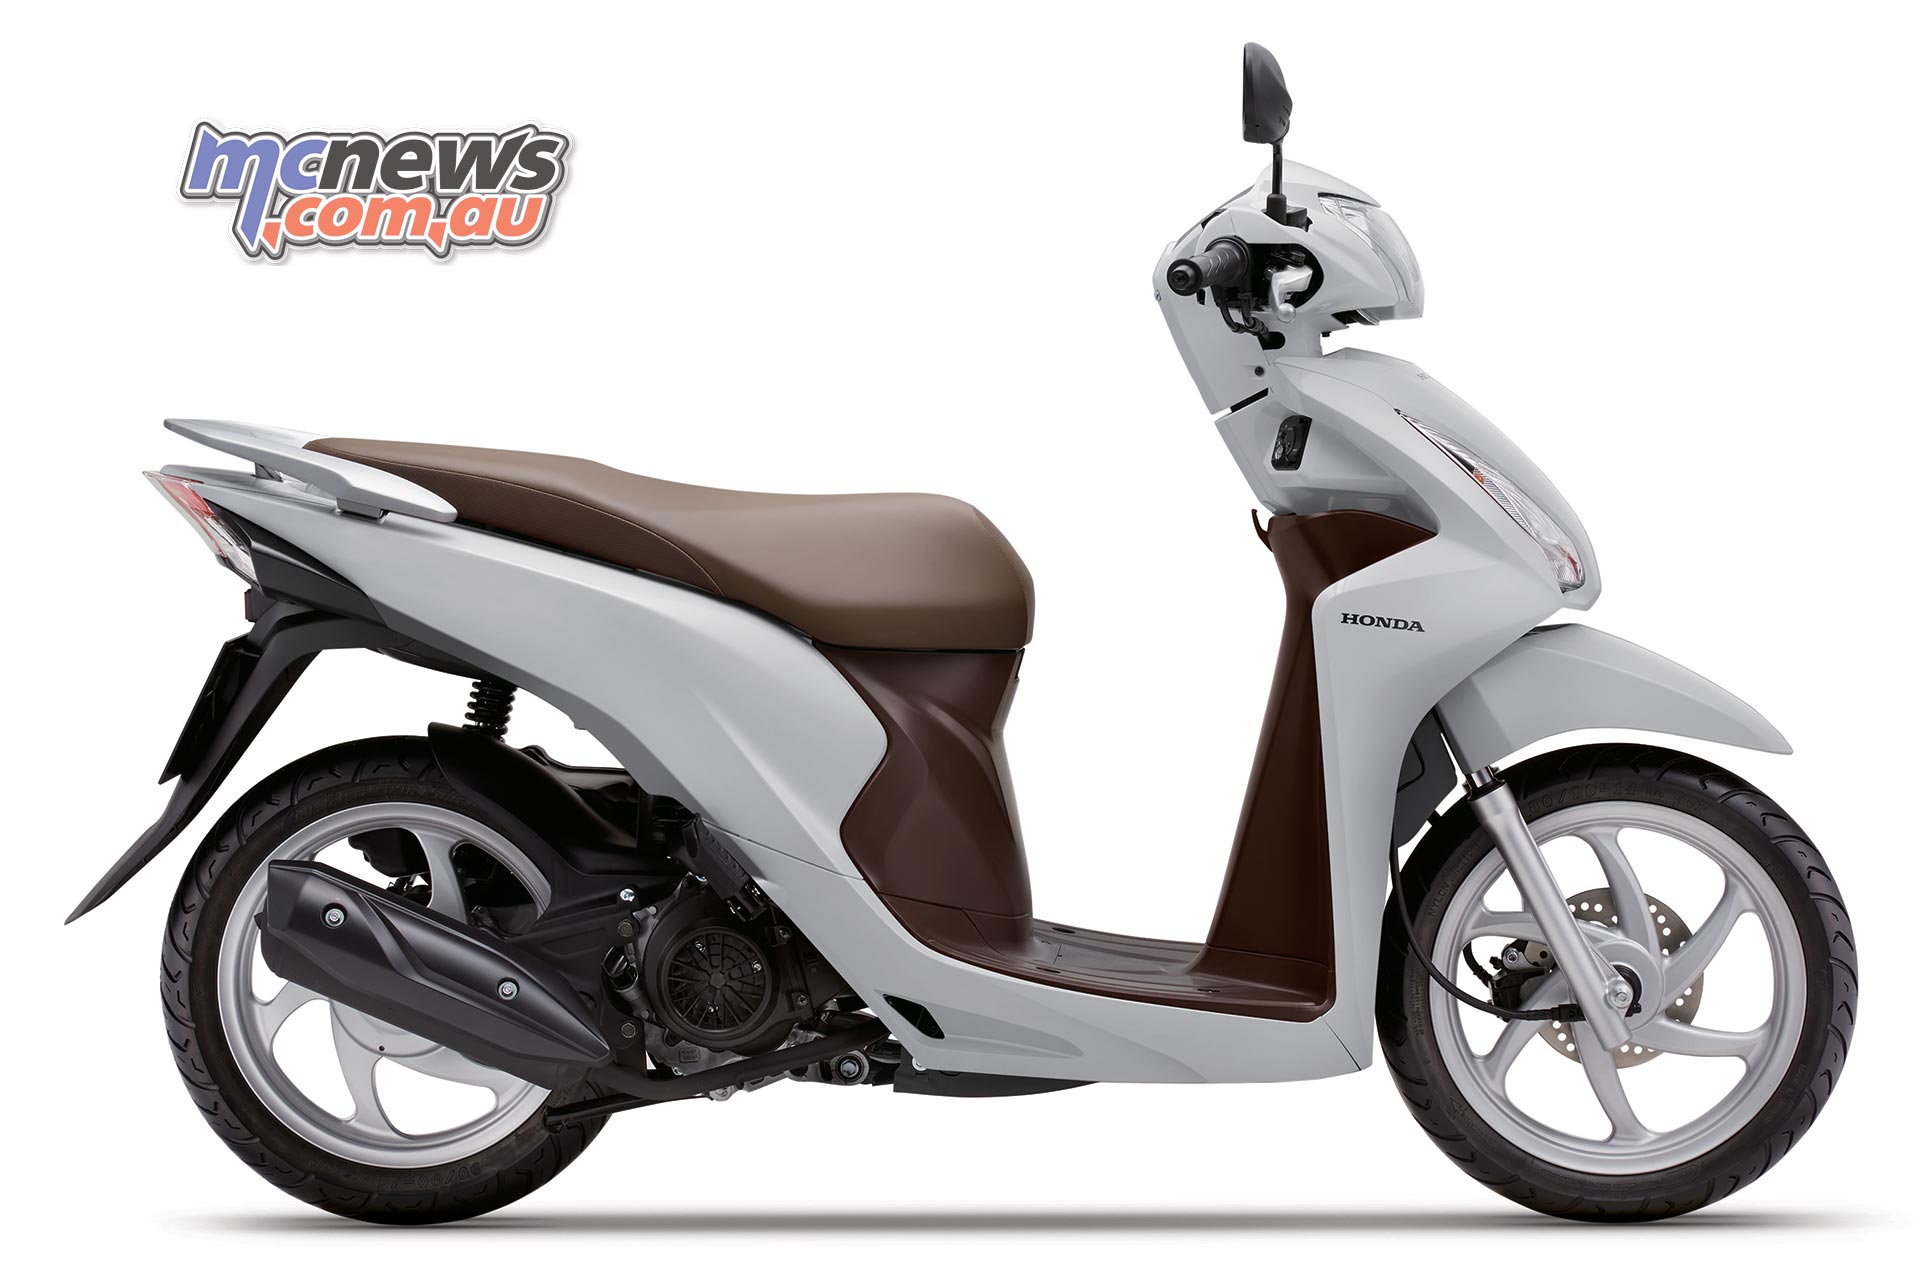 top rated scooters 2018